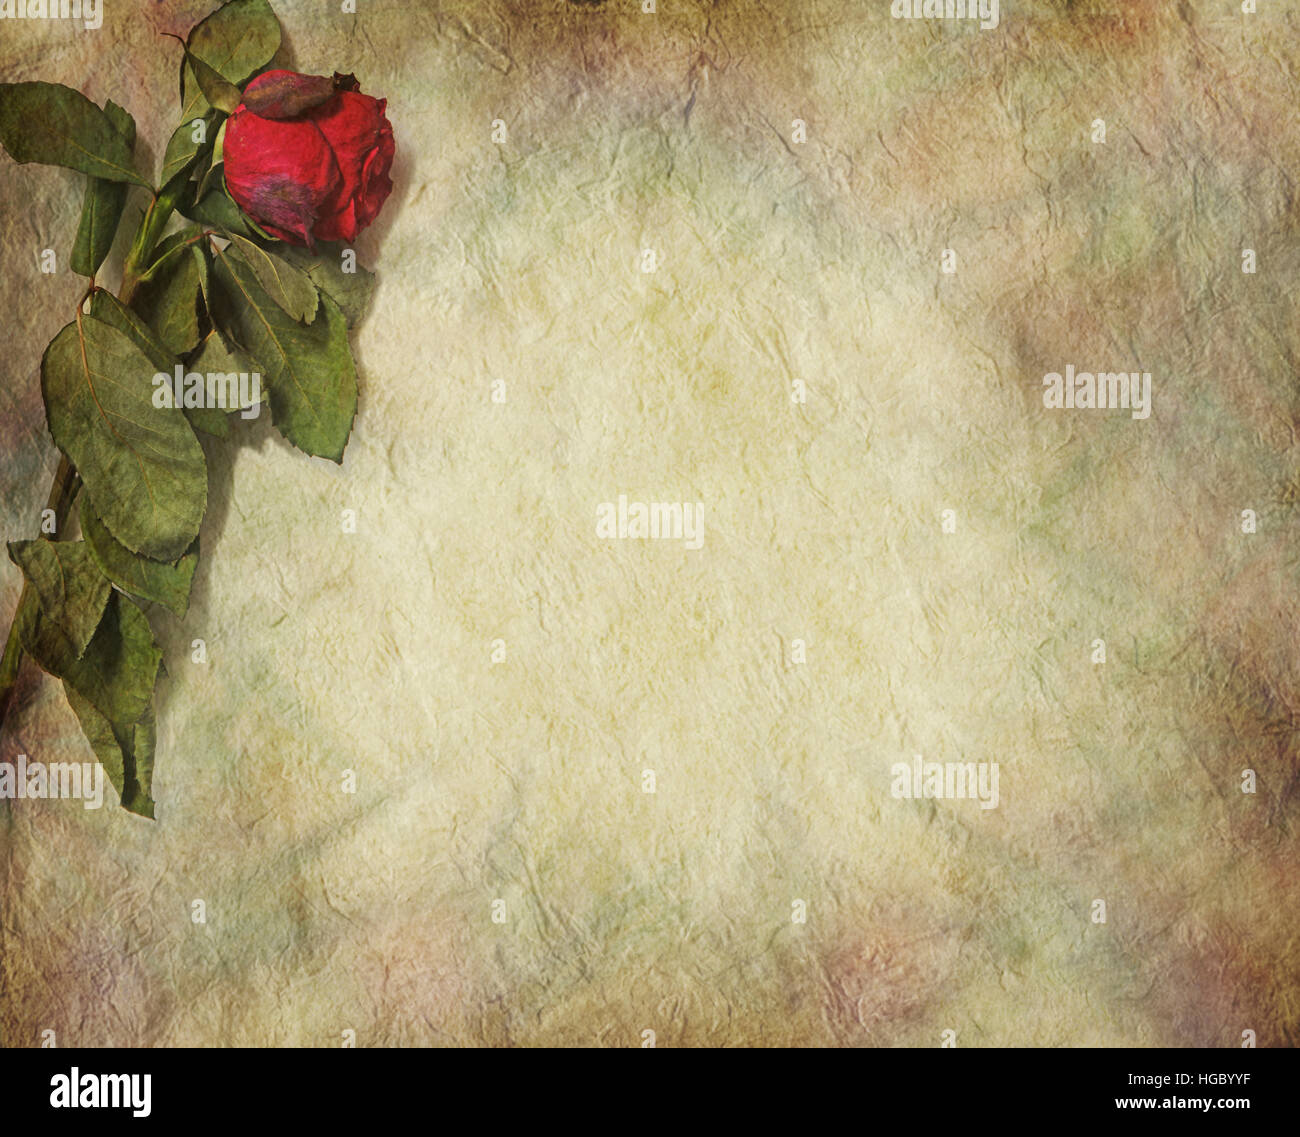 dried red rose laying in top left corner of stone effect rustic grunge background with plenty of copy space Stock Photo